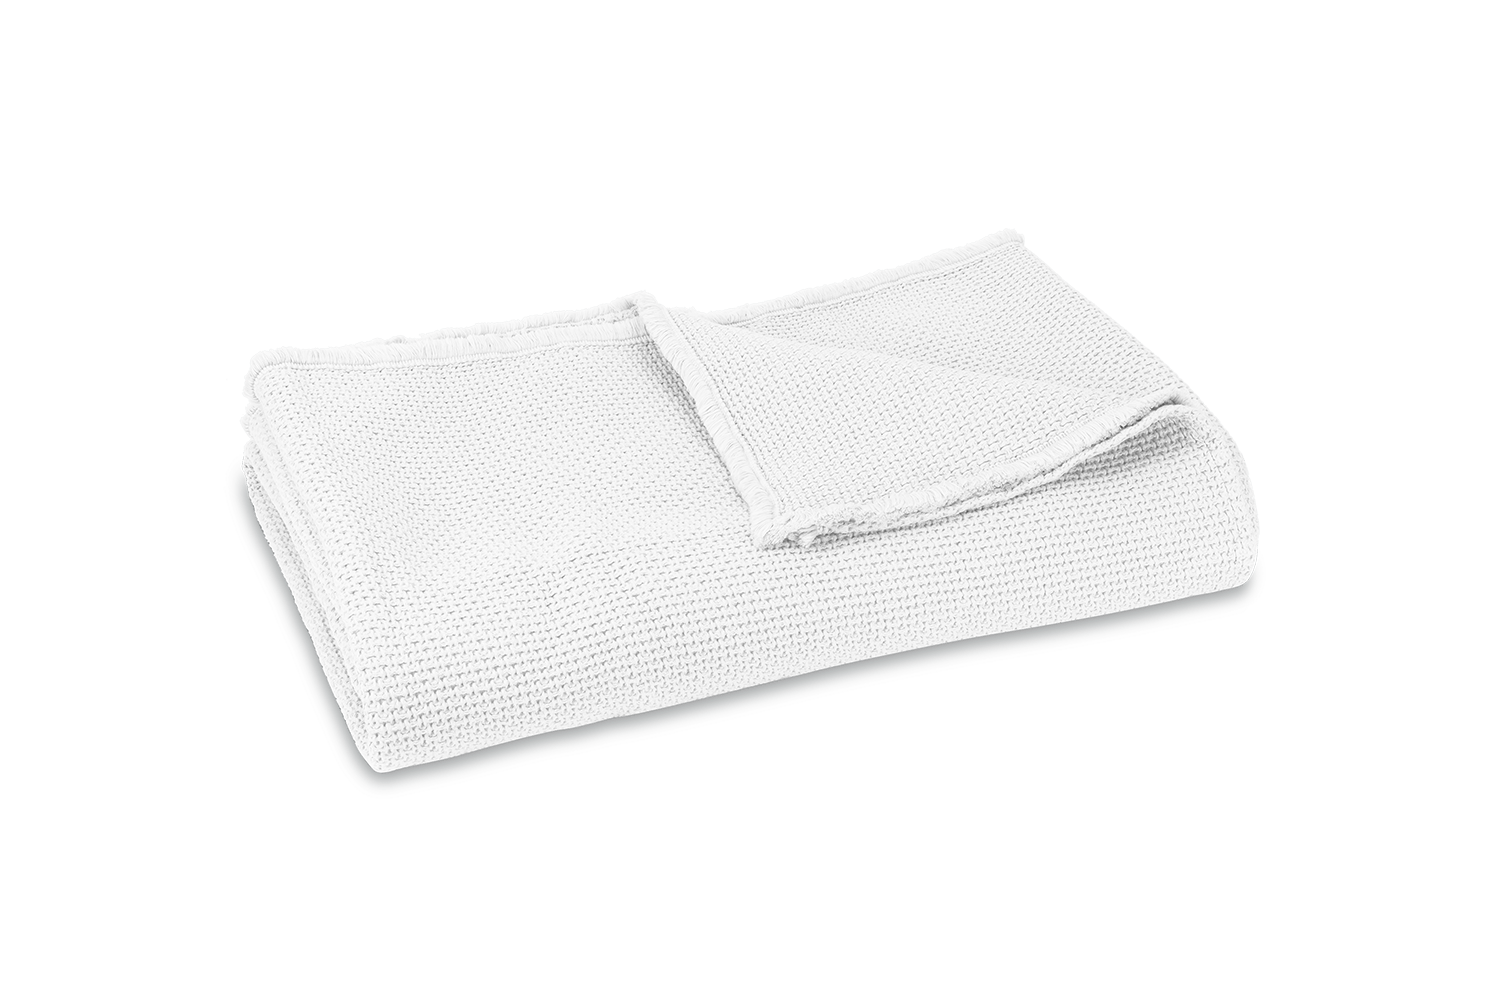 https://matouk-website.imgix.net/spree/products/4678/original/Selah_coverlet_white_primary.png?1566307281?auto=format